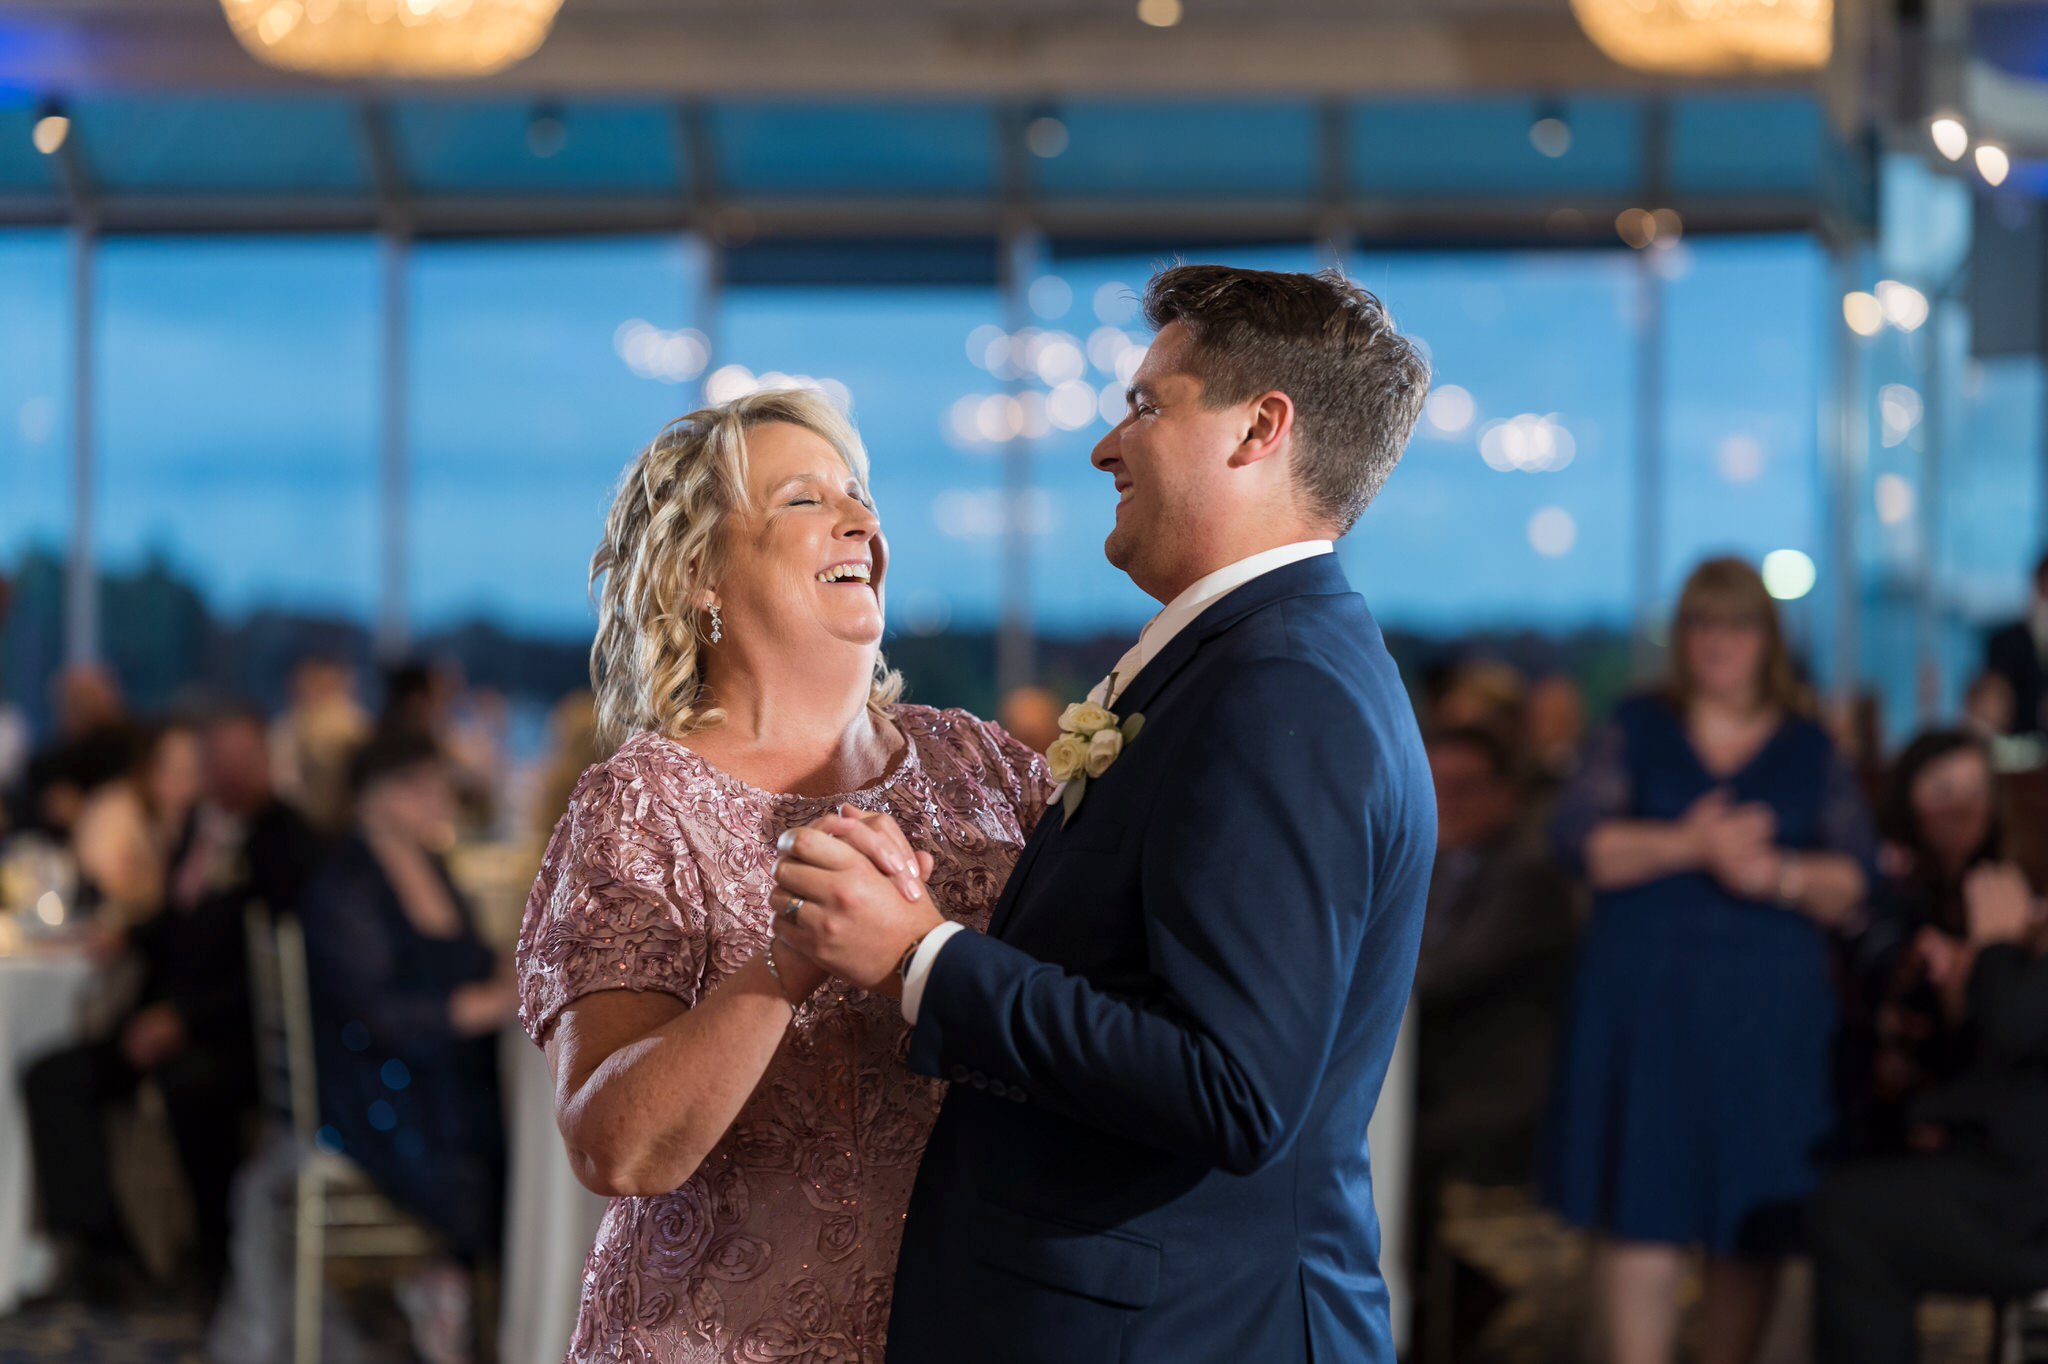 Mother of the groom, wearing a pink dress, dances with her son during MacRay Harbor wedding reception